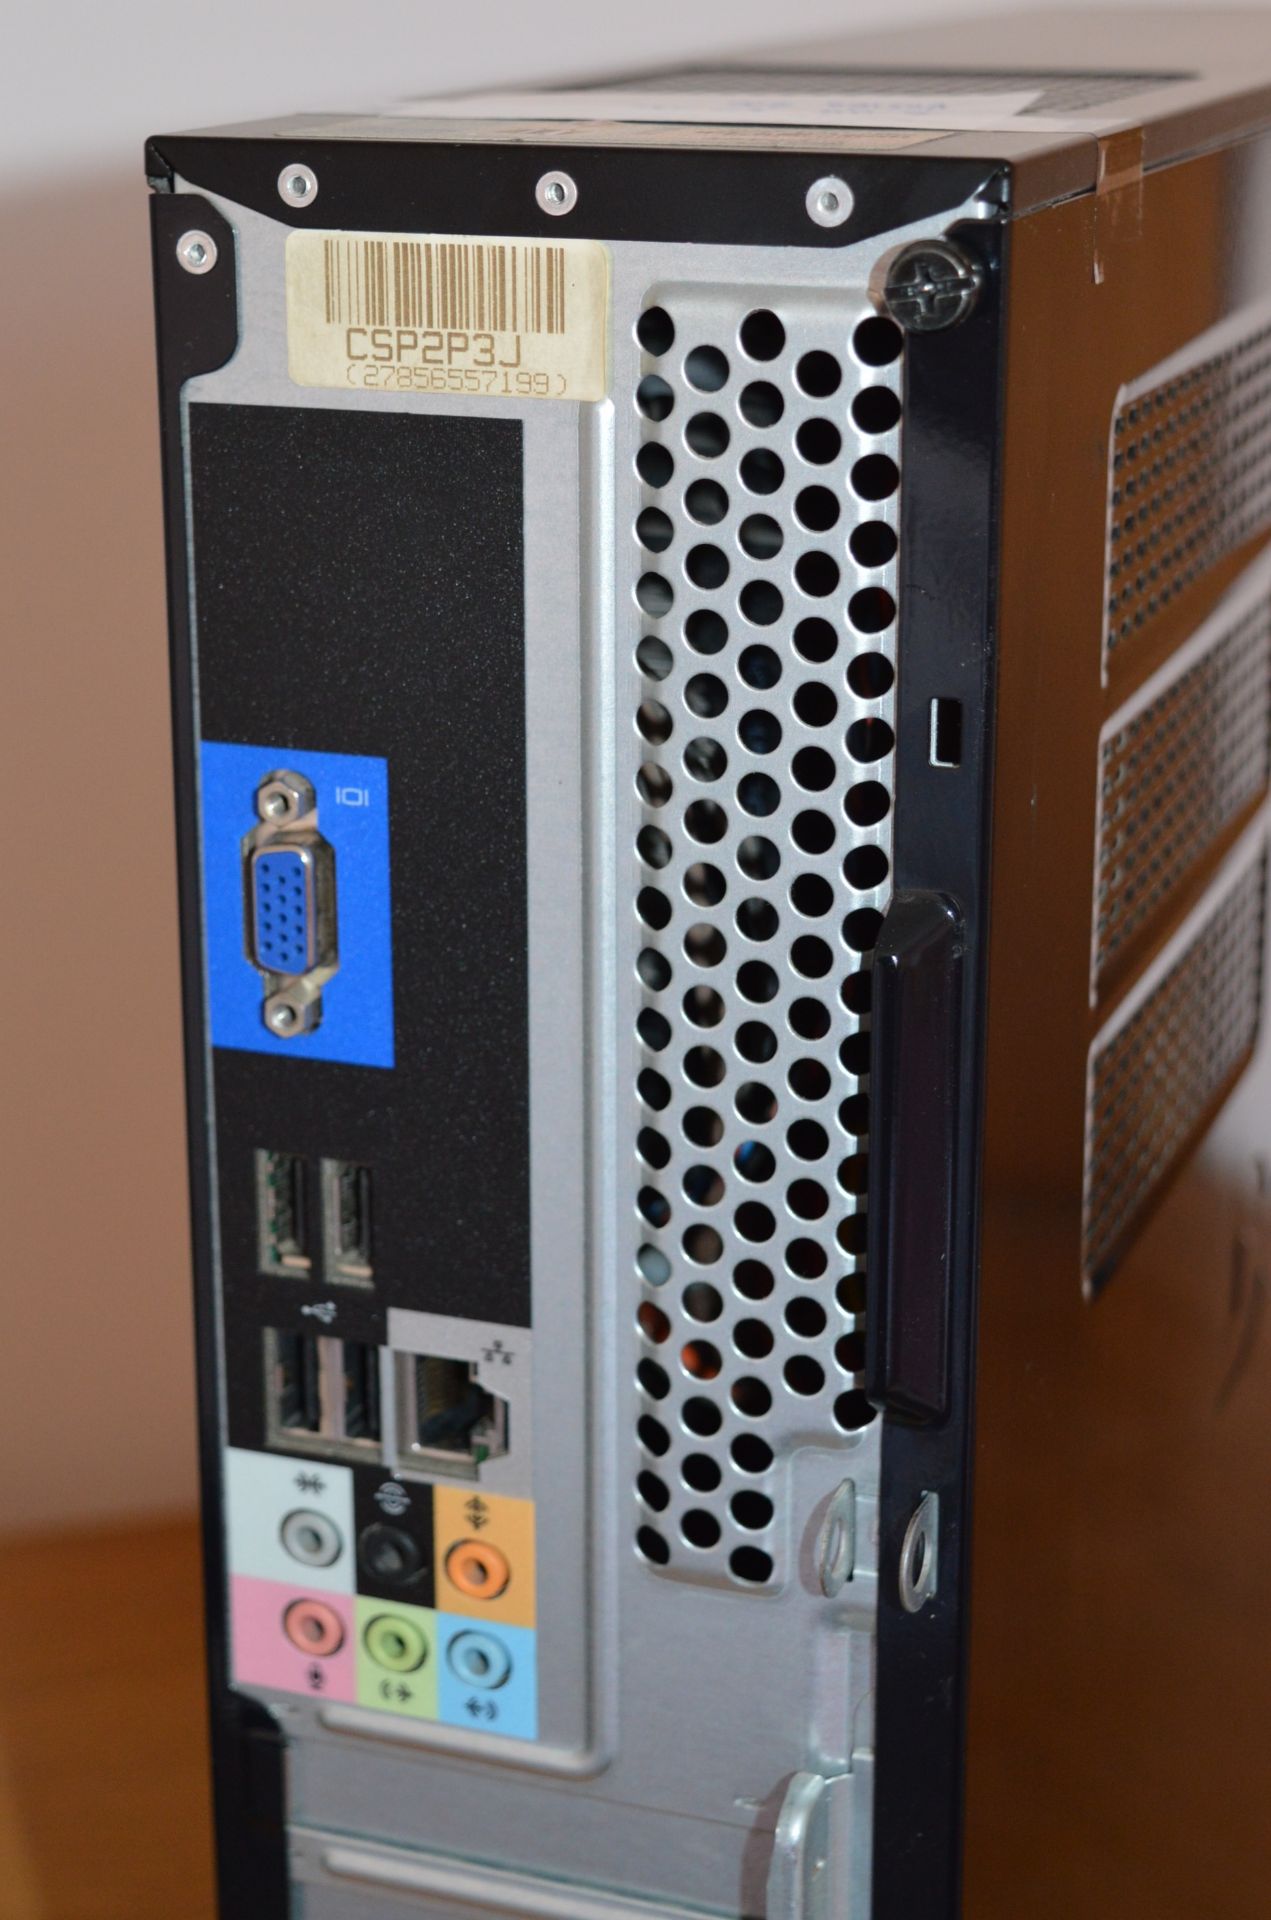 1 x Dell Vostro 220 Desktop Computer - Features Intel 2.0ghz Dual Core Processor, 2gb Ram and - Image 2 of 3